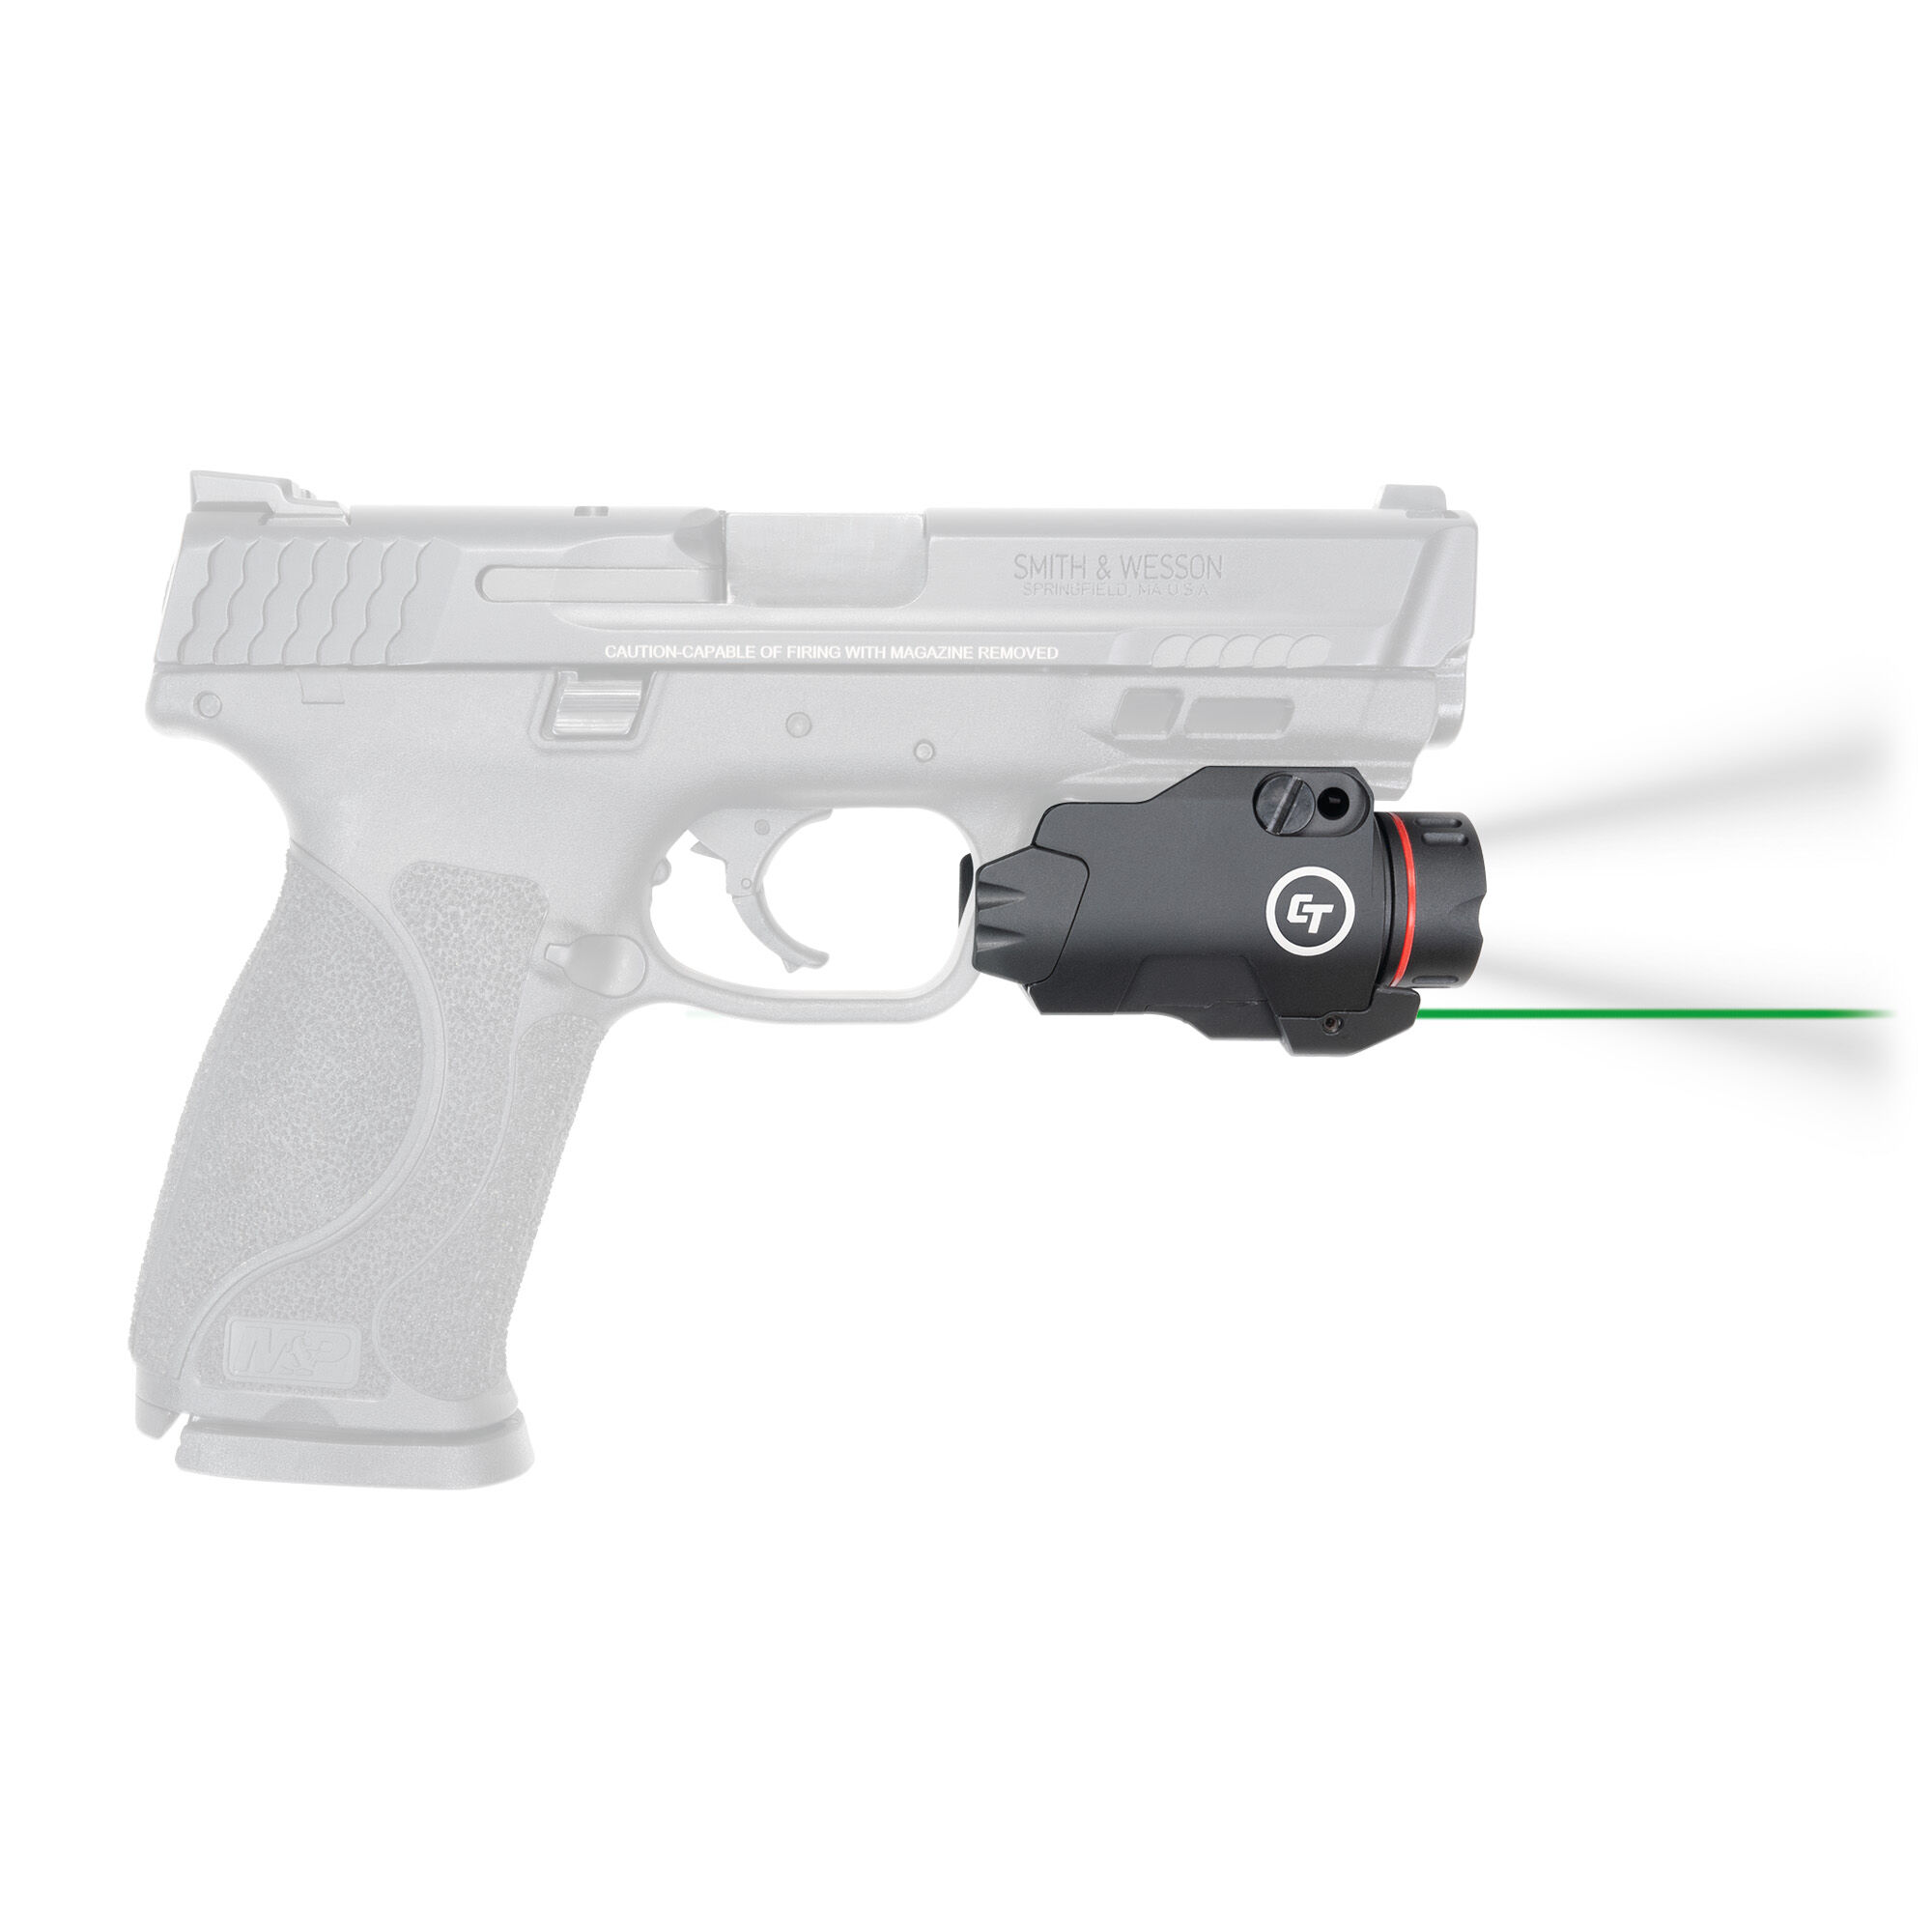 Bundle Crimson Trace LG-401 Lasergrips Red Laser Sight Grips for 1911 Full-Size Pistols with Handheld Tactical Flashlight